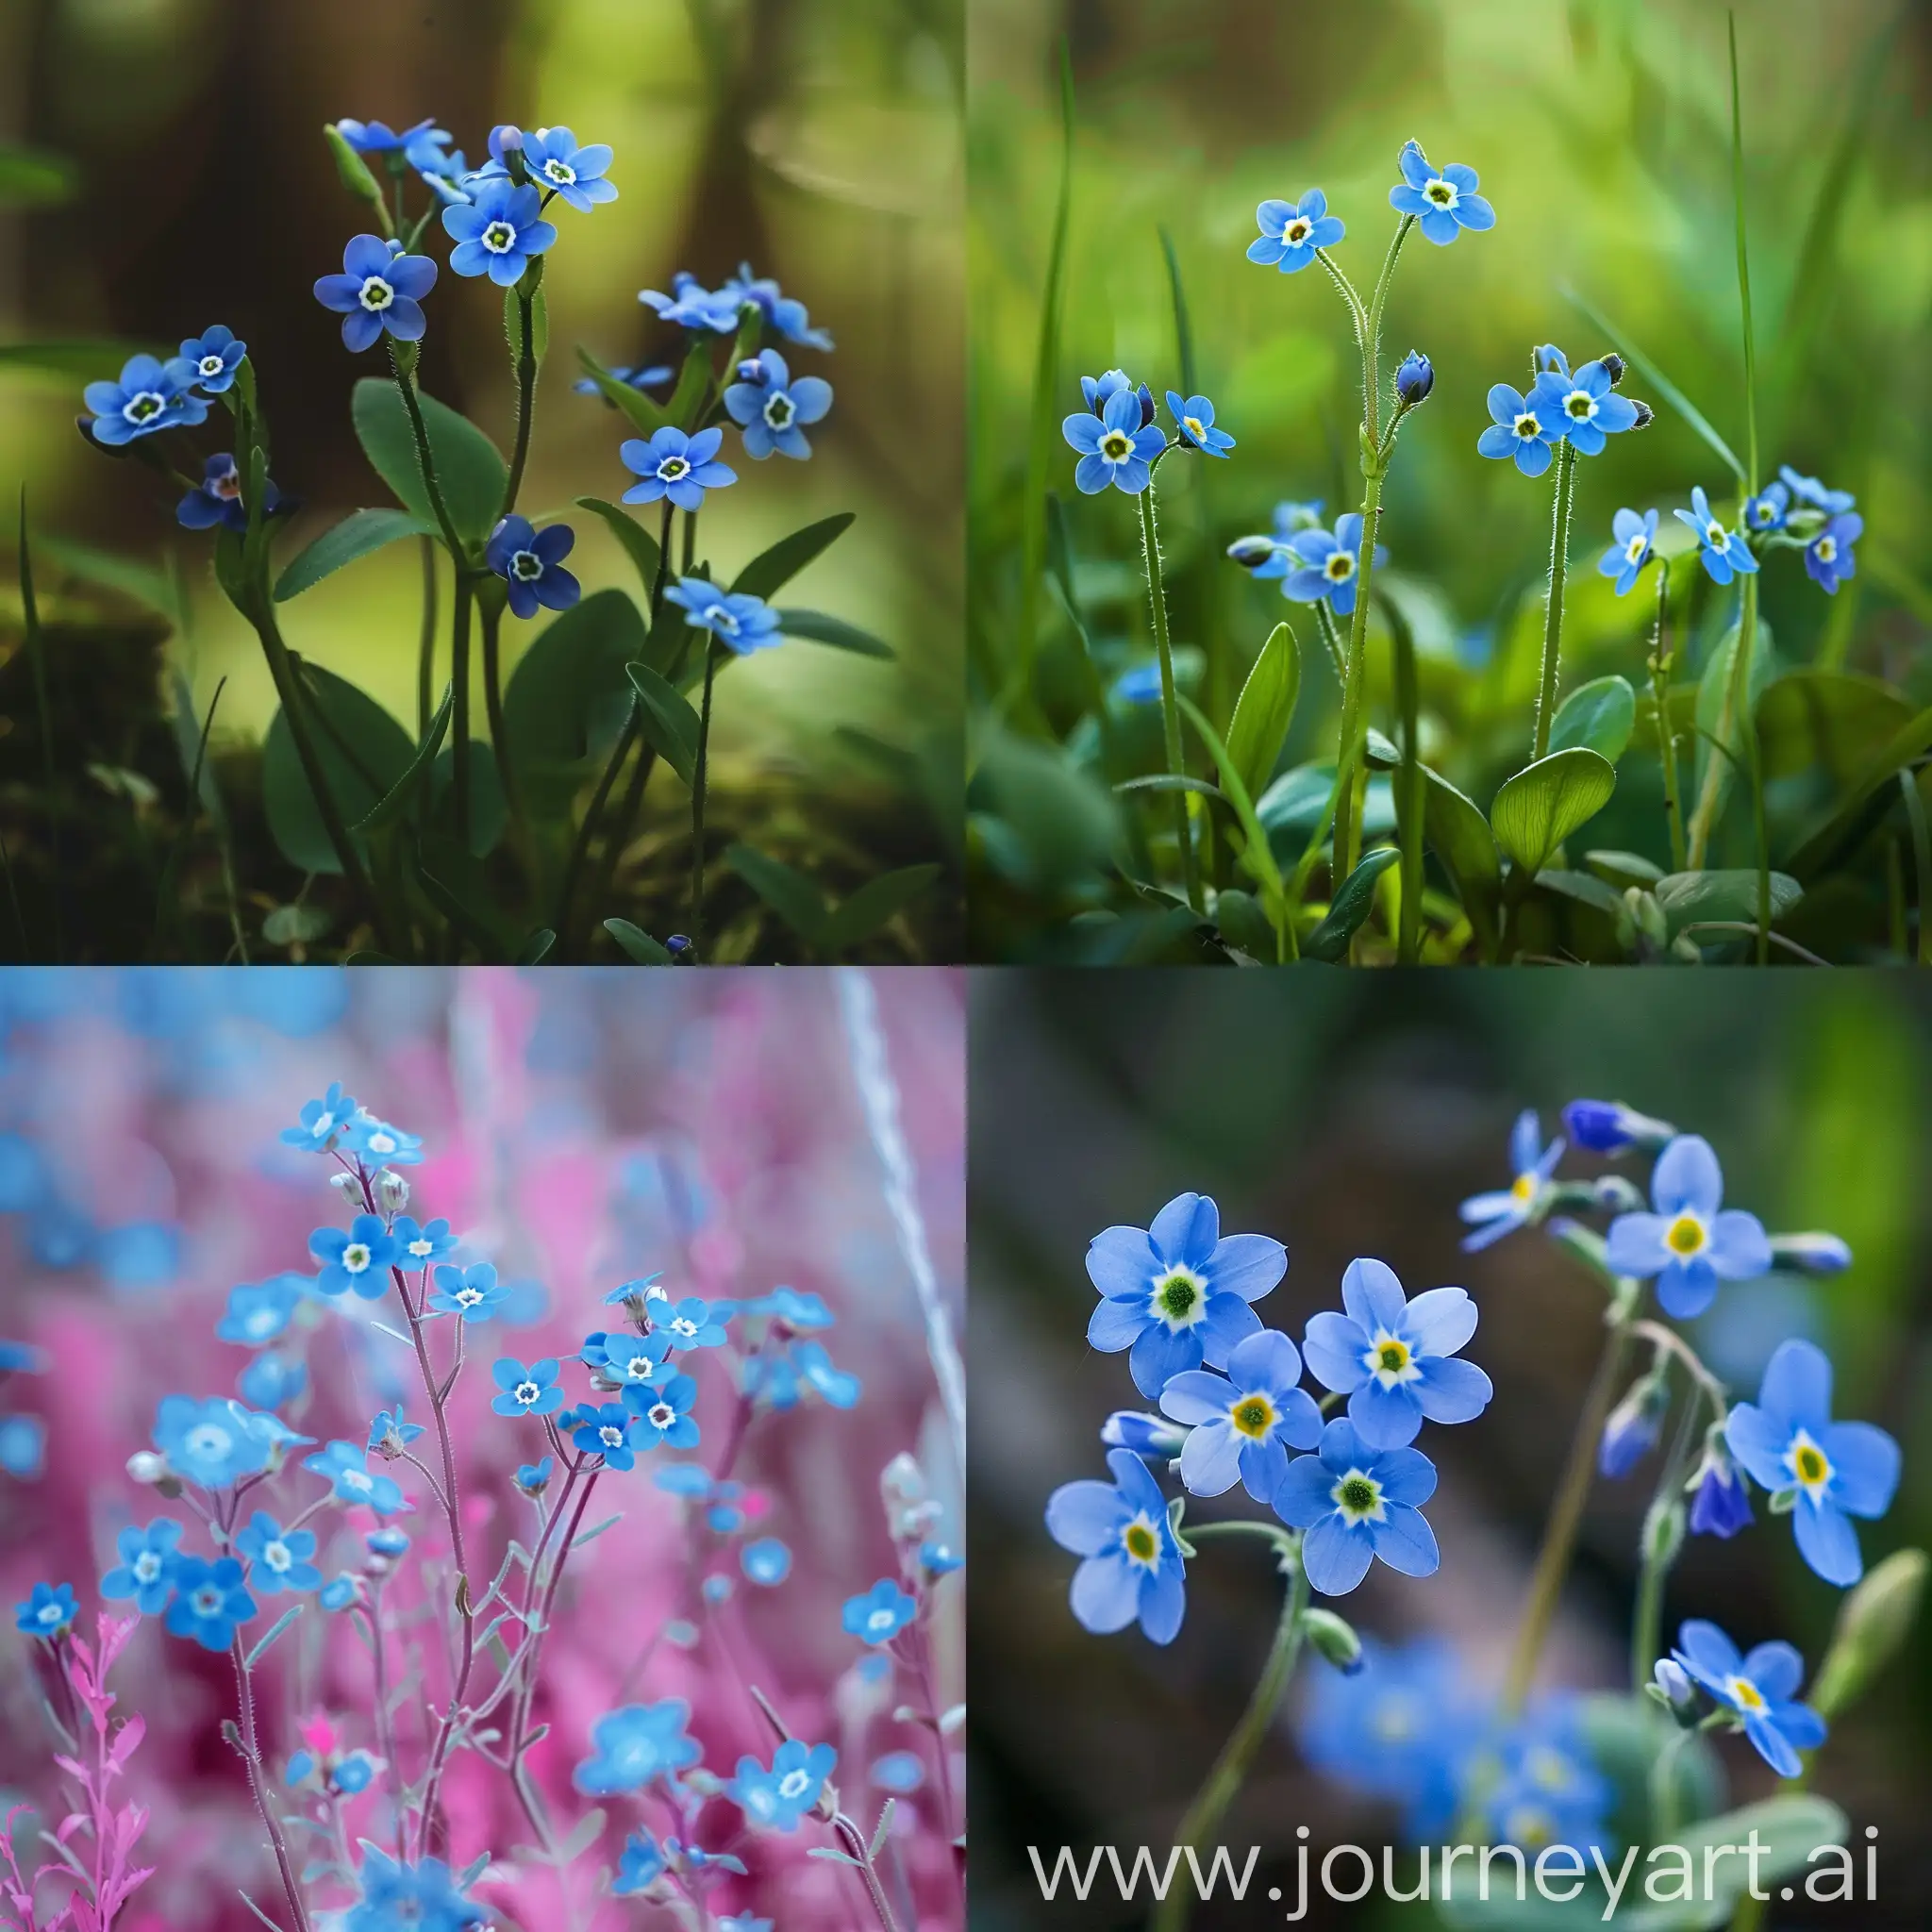 Vibrant-ForgetMeNot-Flowers-Blooming-in-Square-Frame